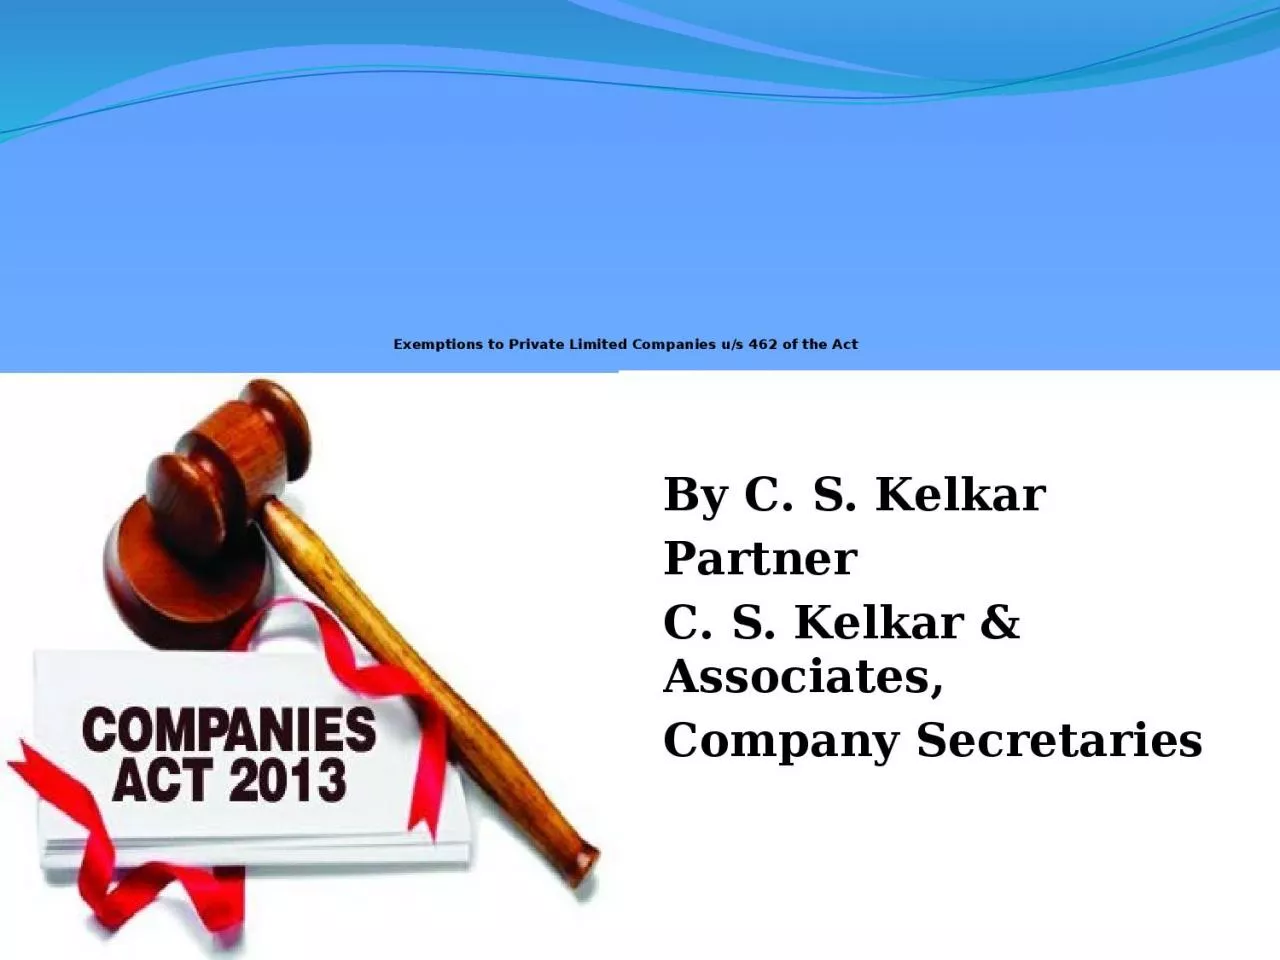 Exemptions to Private Limited Companies u/s 462 of the Act